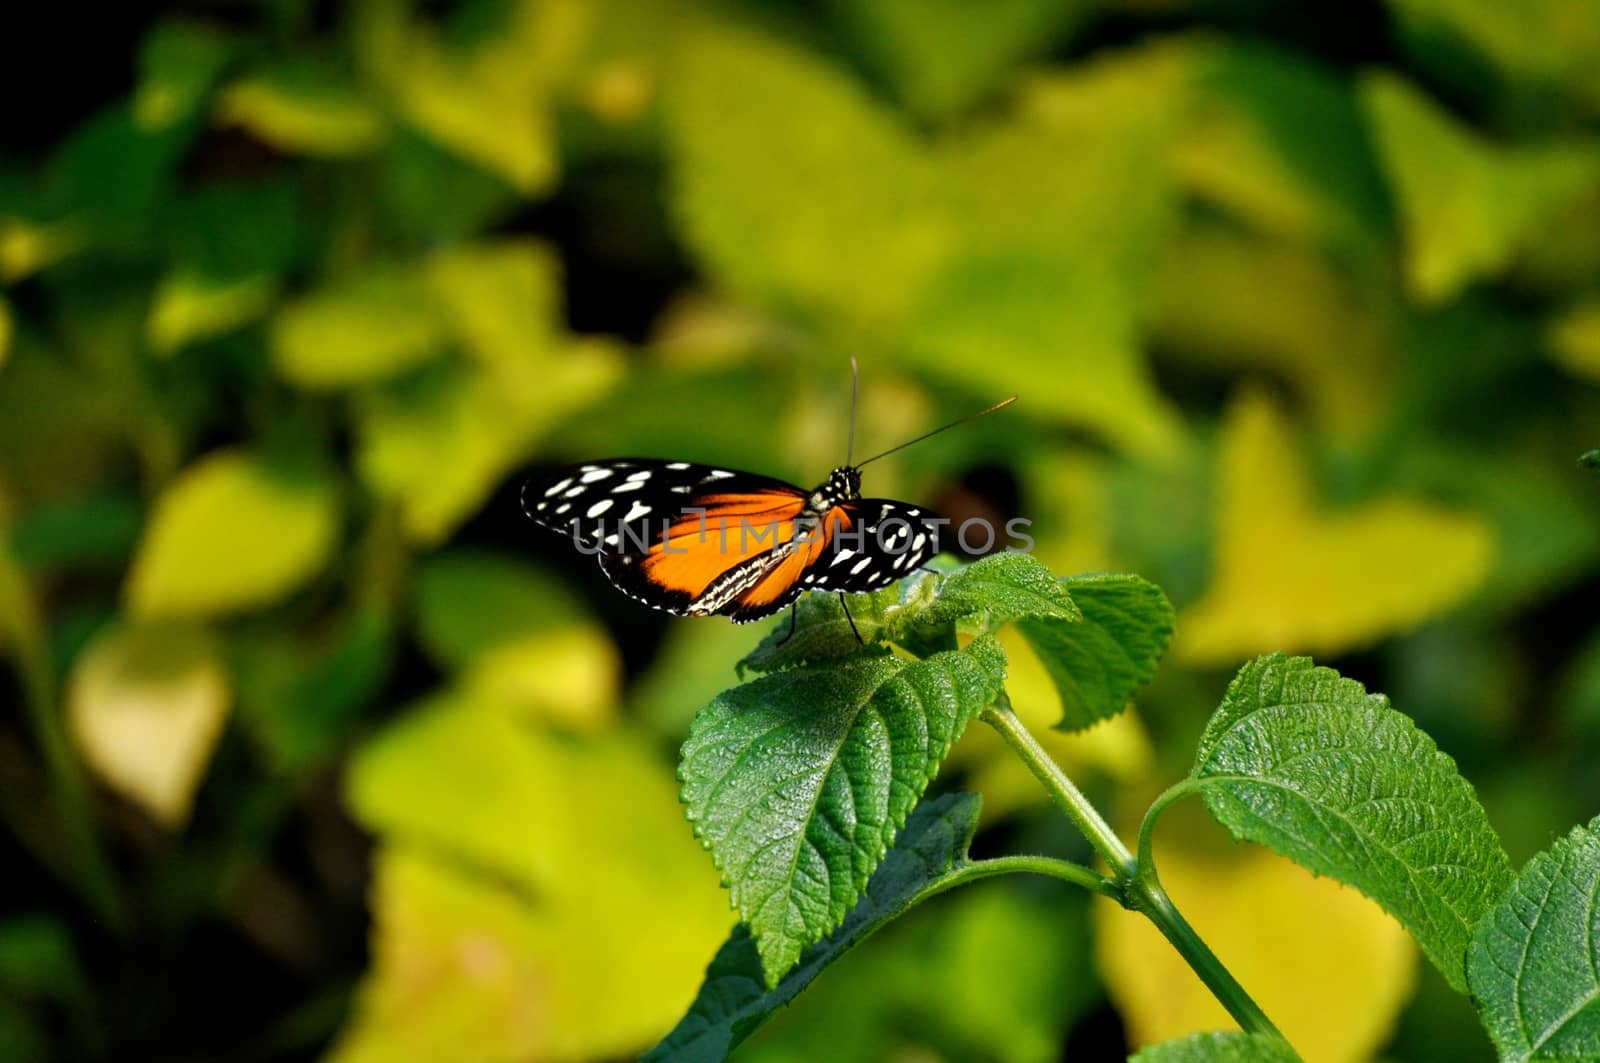 Butterfly on leaves by RefocusPhoto